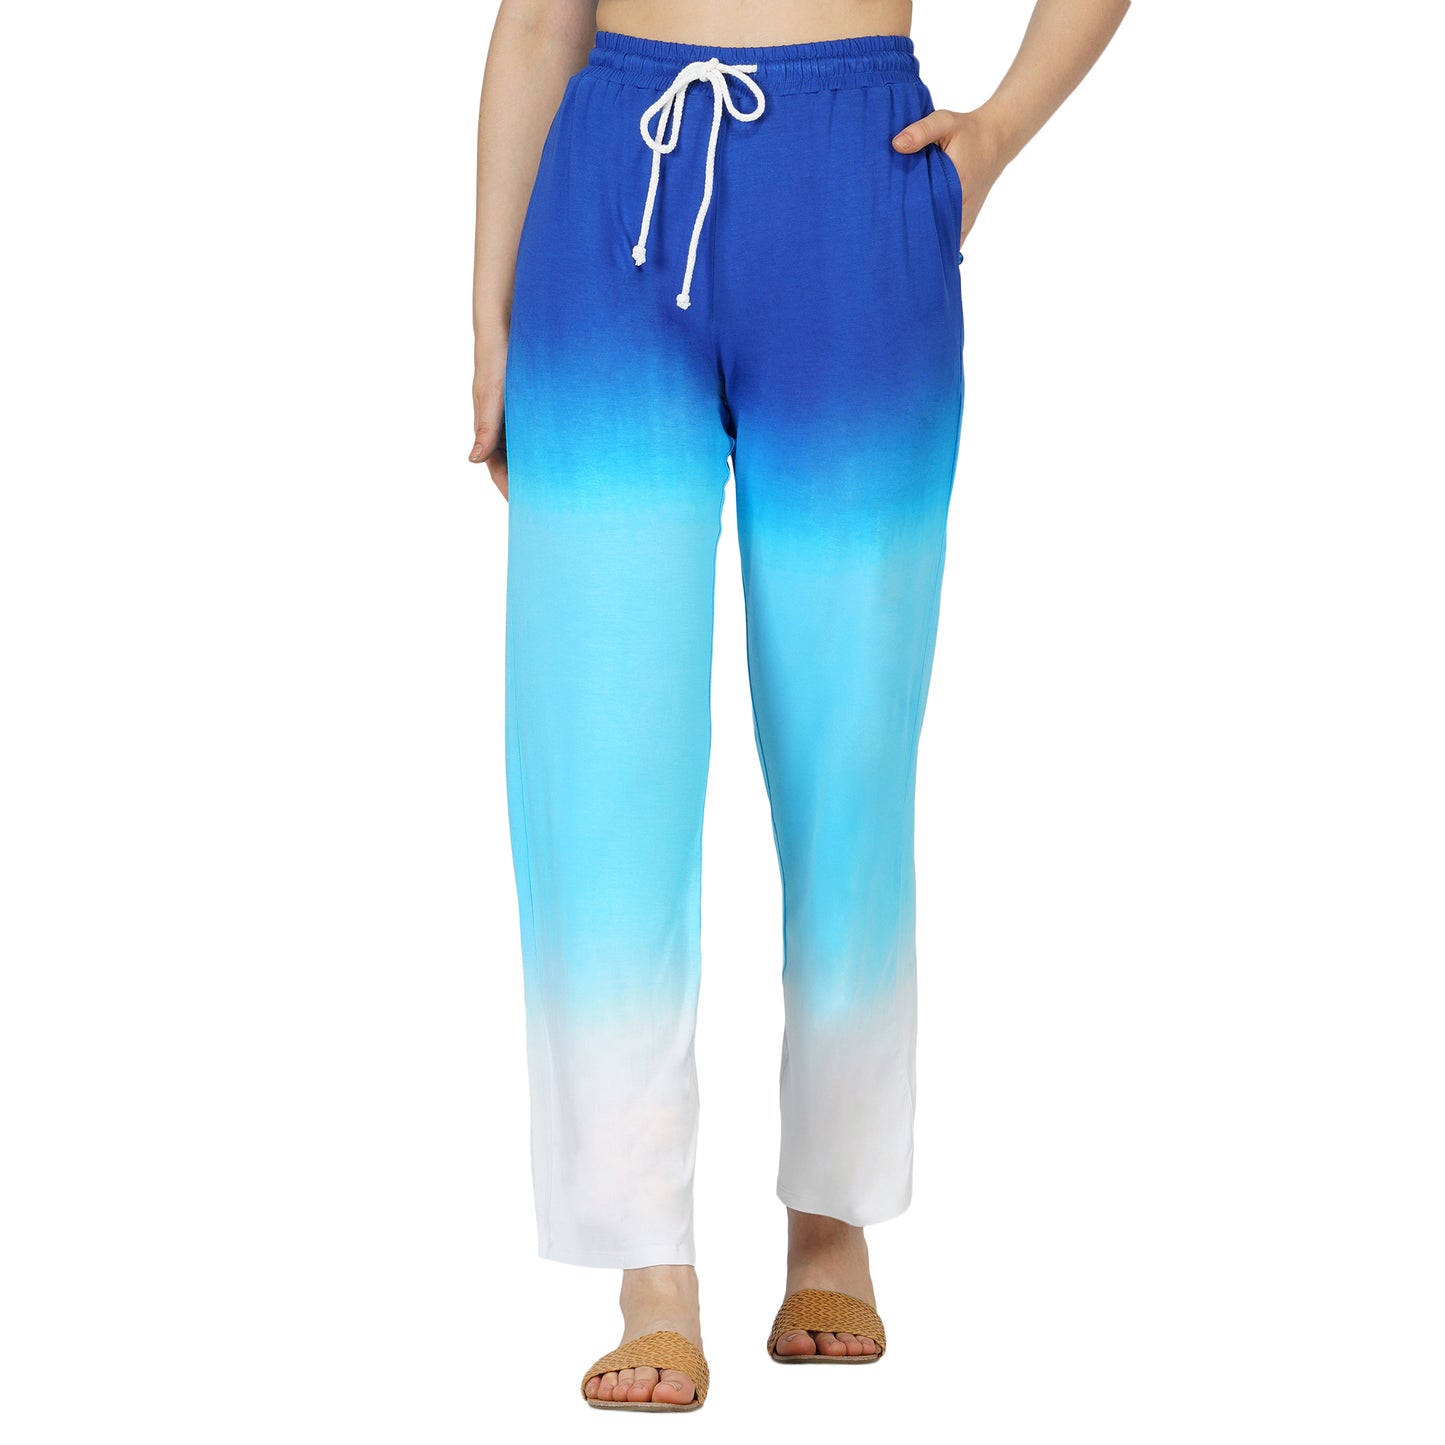 SLAY. Women's Blue to White Ombre T shirt & Pants Co-ord Set